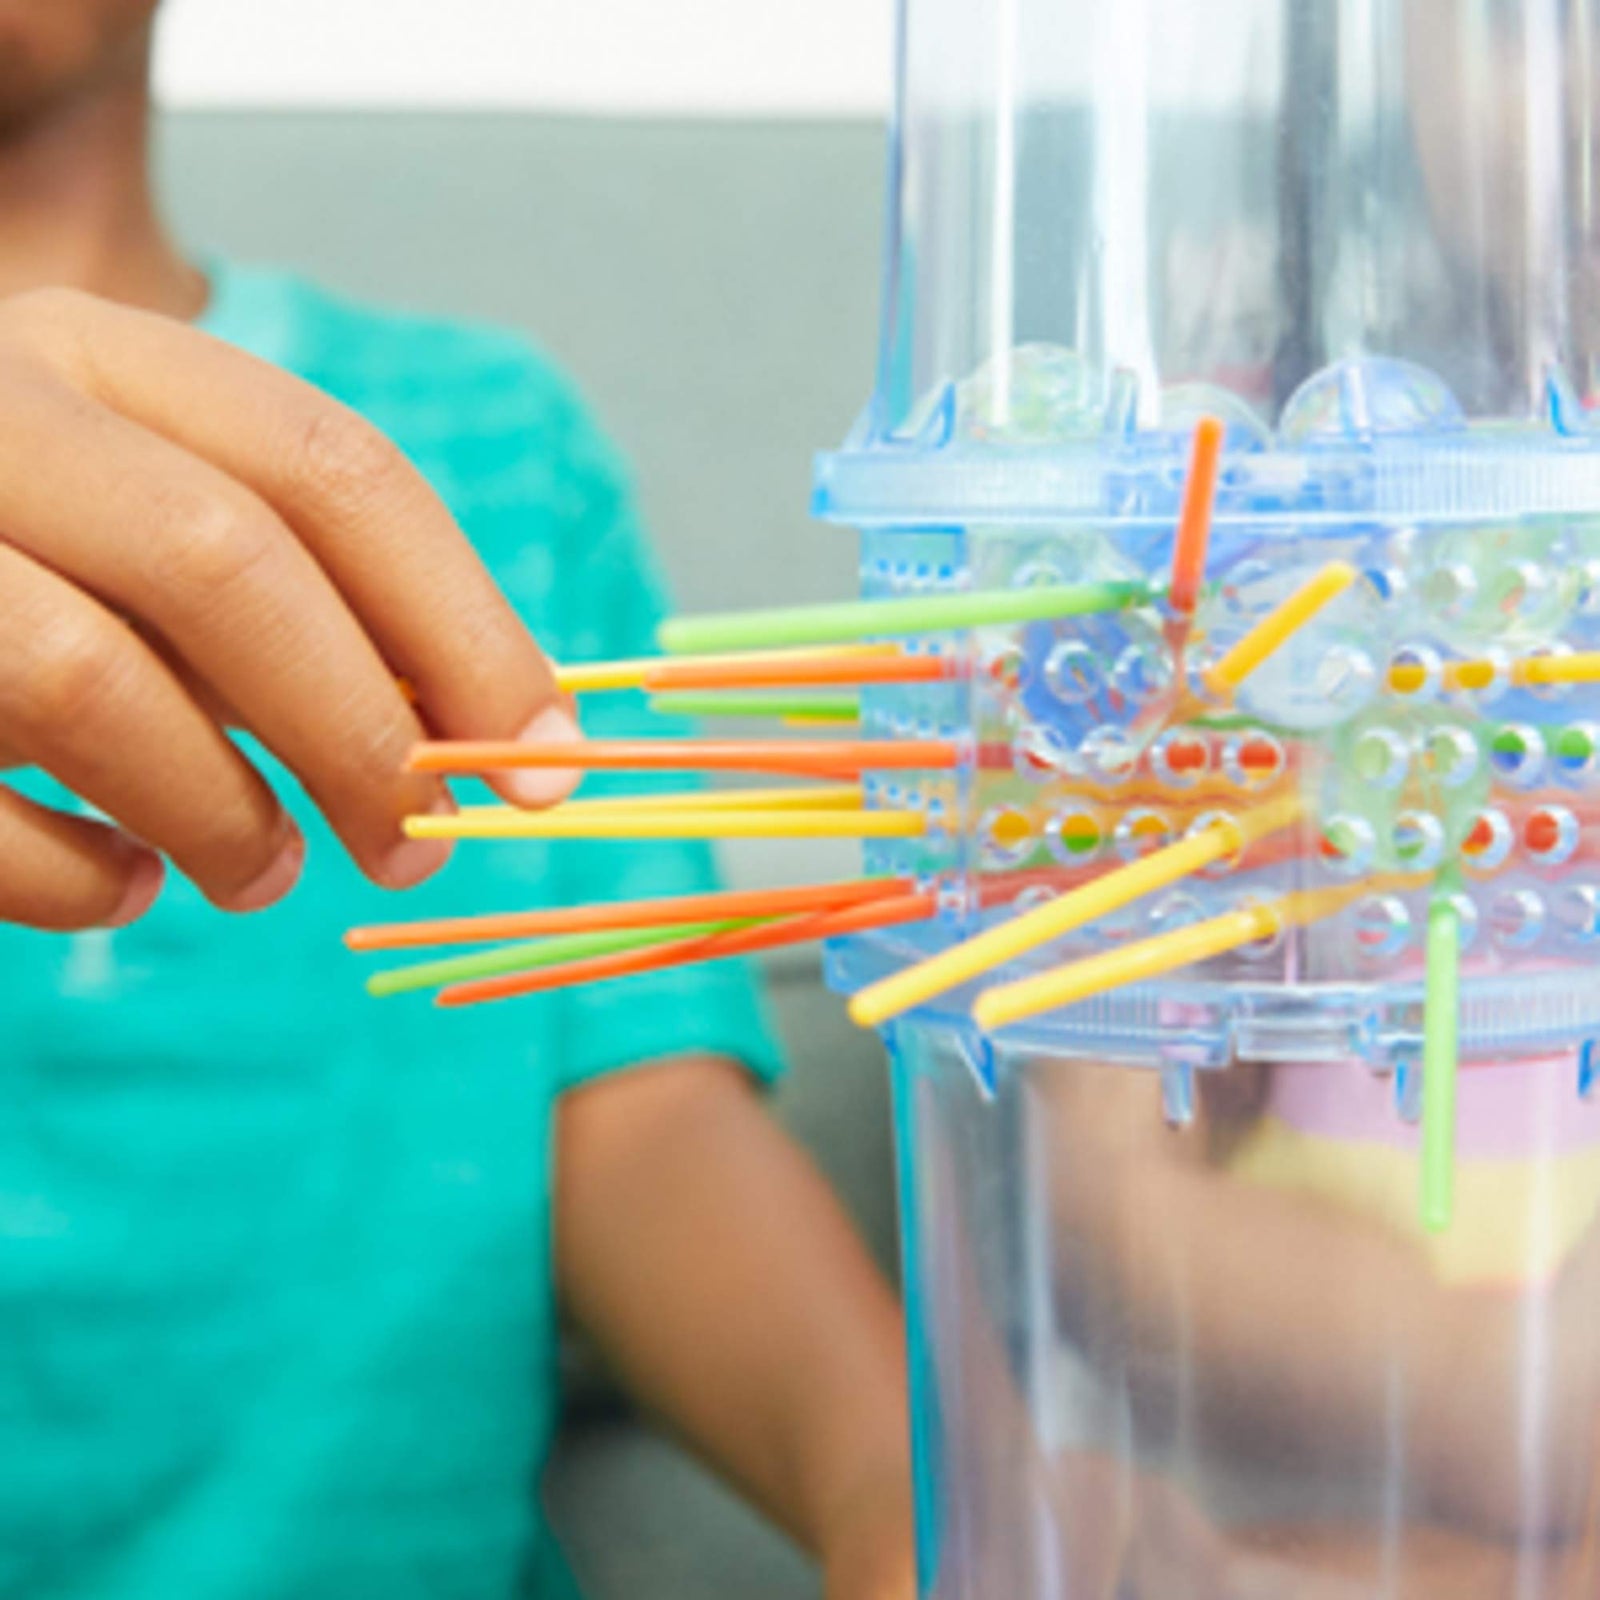 Kerplunk Classic Kids Game with Marbles, Sticks and Game Unit, Easy-to-Learn, Makes a Great Gift for 5 Year Olds and Up